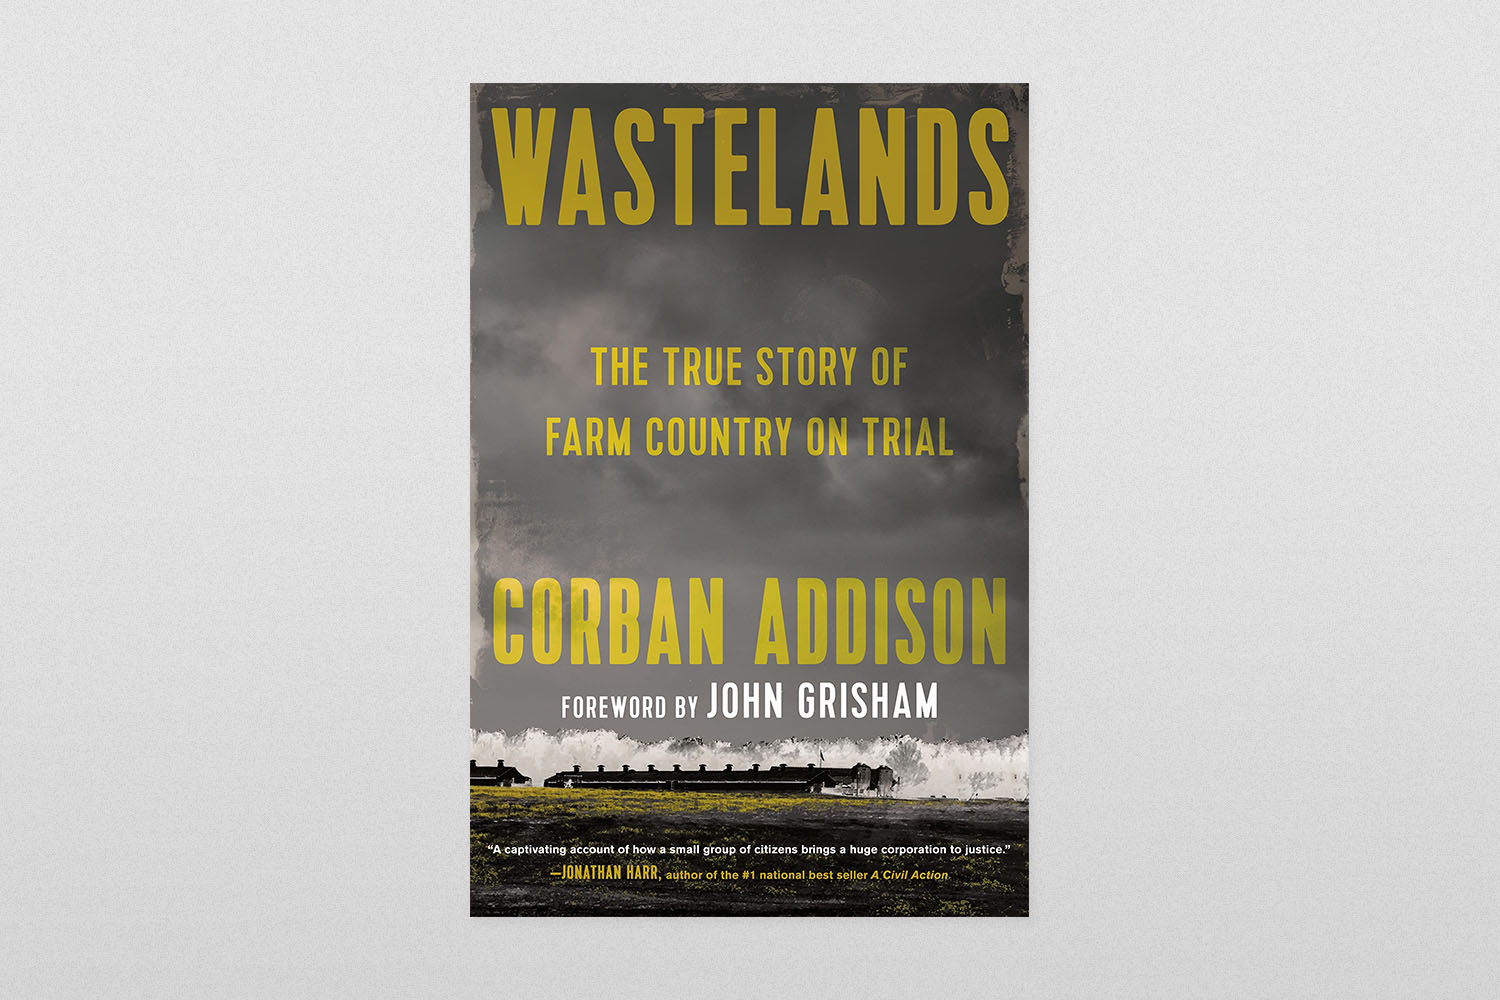 Wastelands: The True Story of Farm Country on Trial